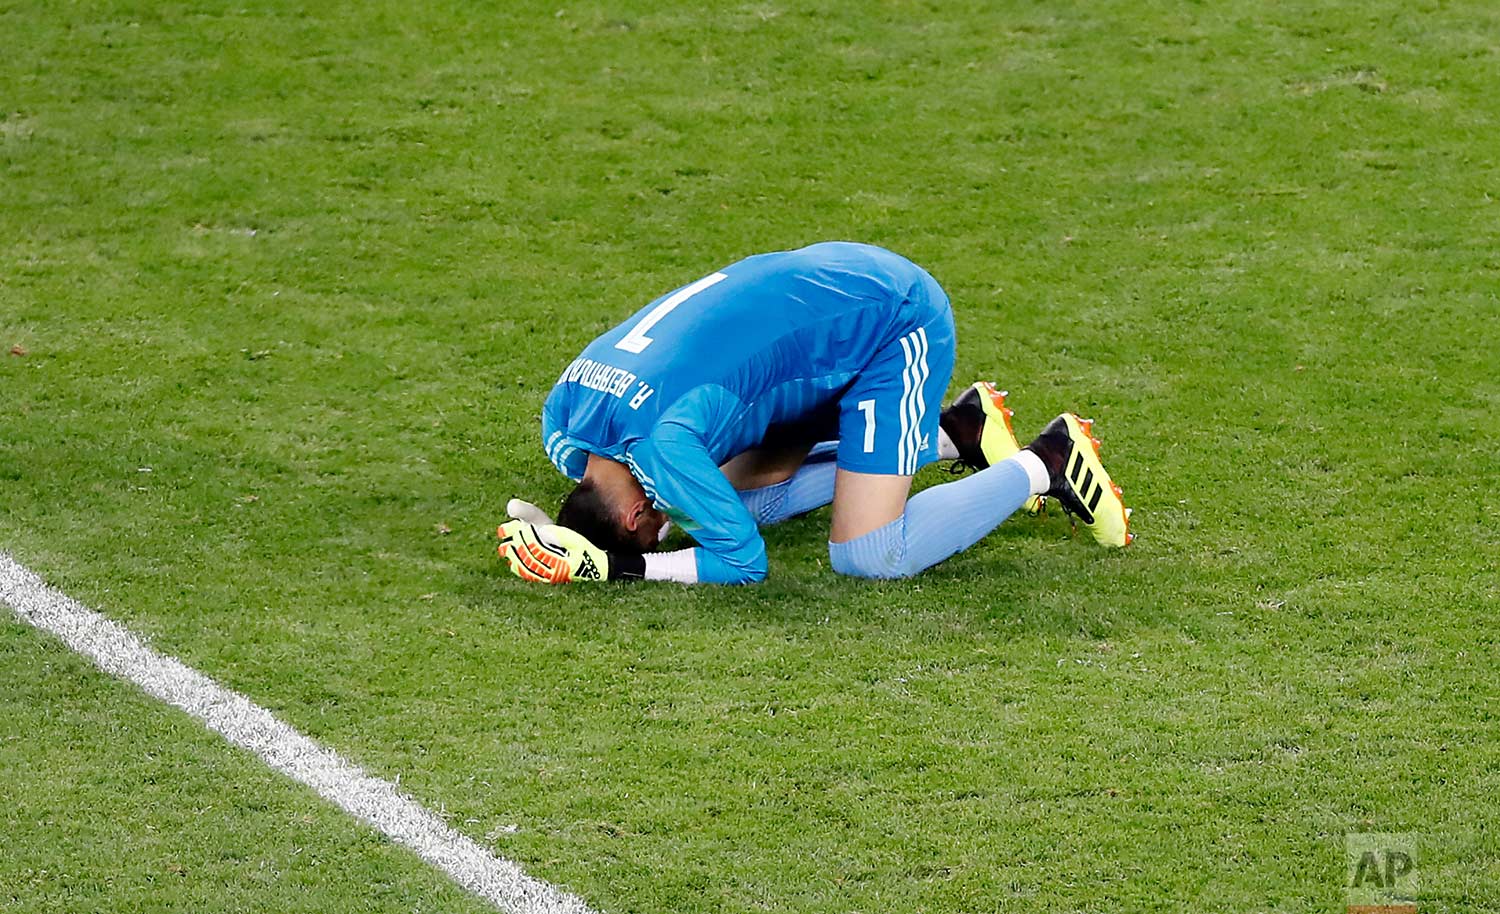  Iran goalkeeper Ali Beiranvand reacts at the end of the group B match between Iran and Portugal at the 2018 soccer World Cup at the Mordovia Arena in Saransk, Russia, Monday, June 25, 2018. (AP Photo/Darko Bandic) 